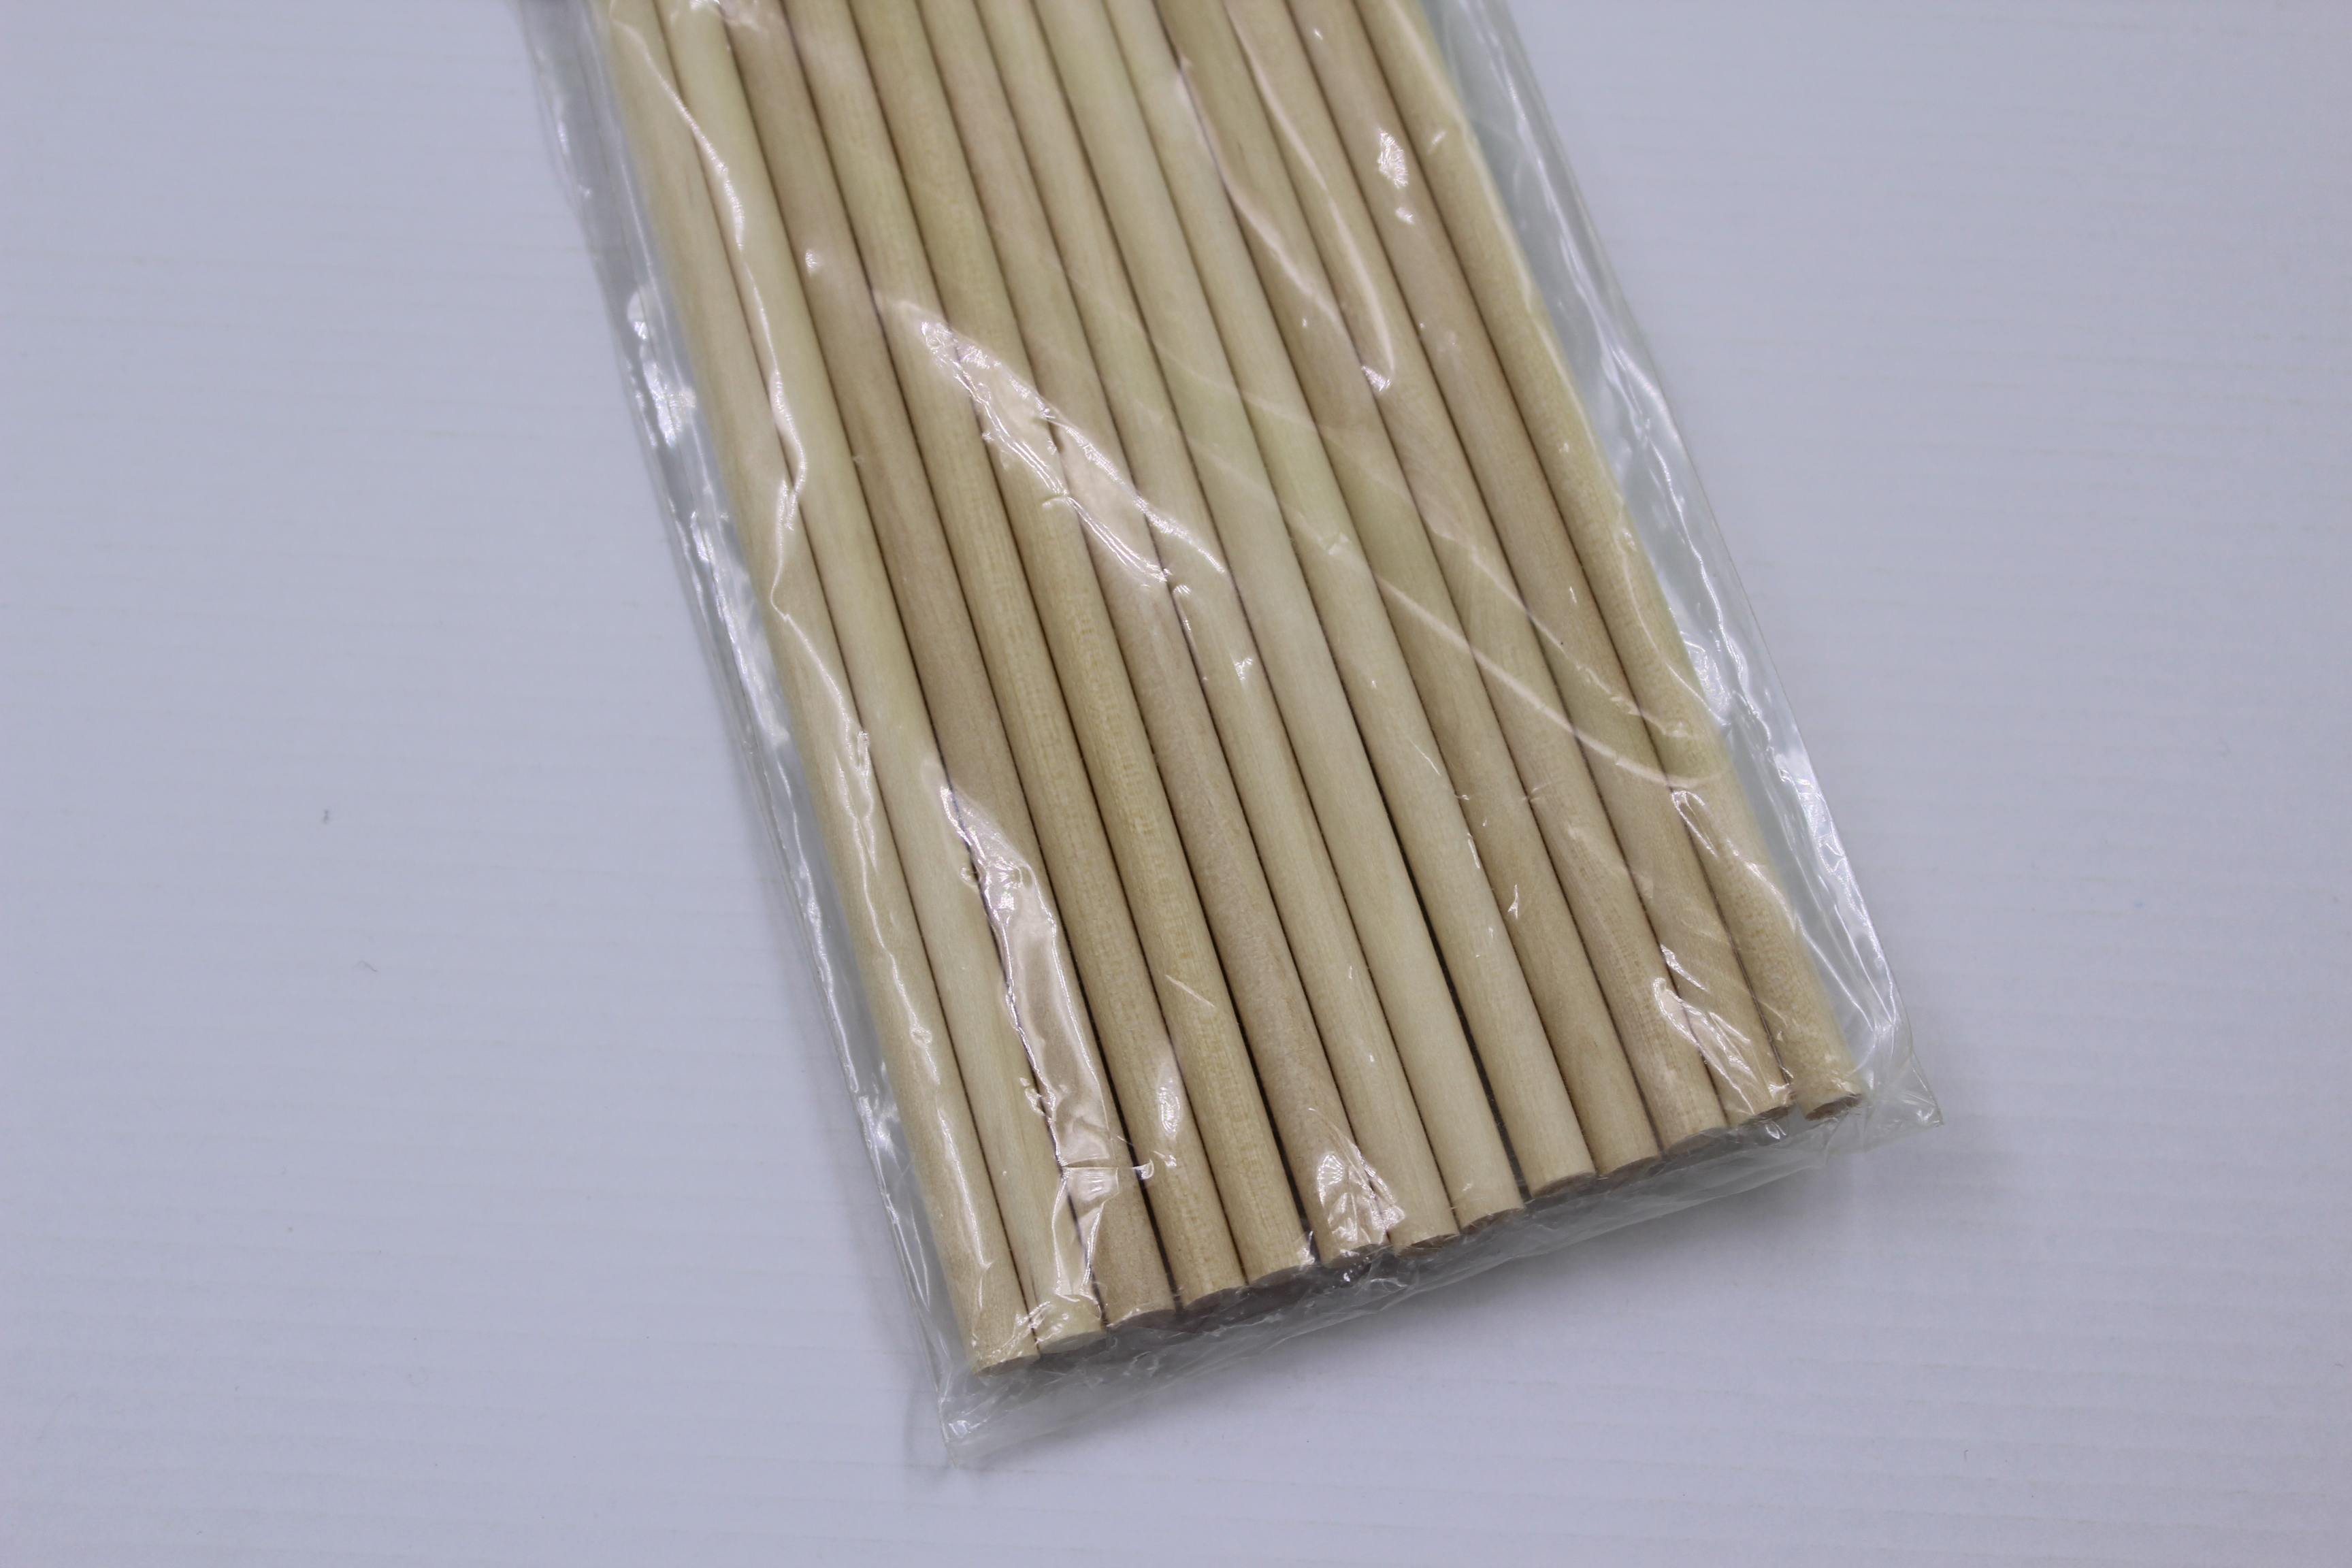 Wood Craft Sticks, 5.5 Inch Wooden Crafts Stick for DIY Craft Project, 500  Pack